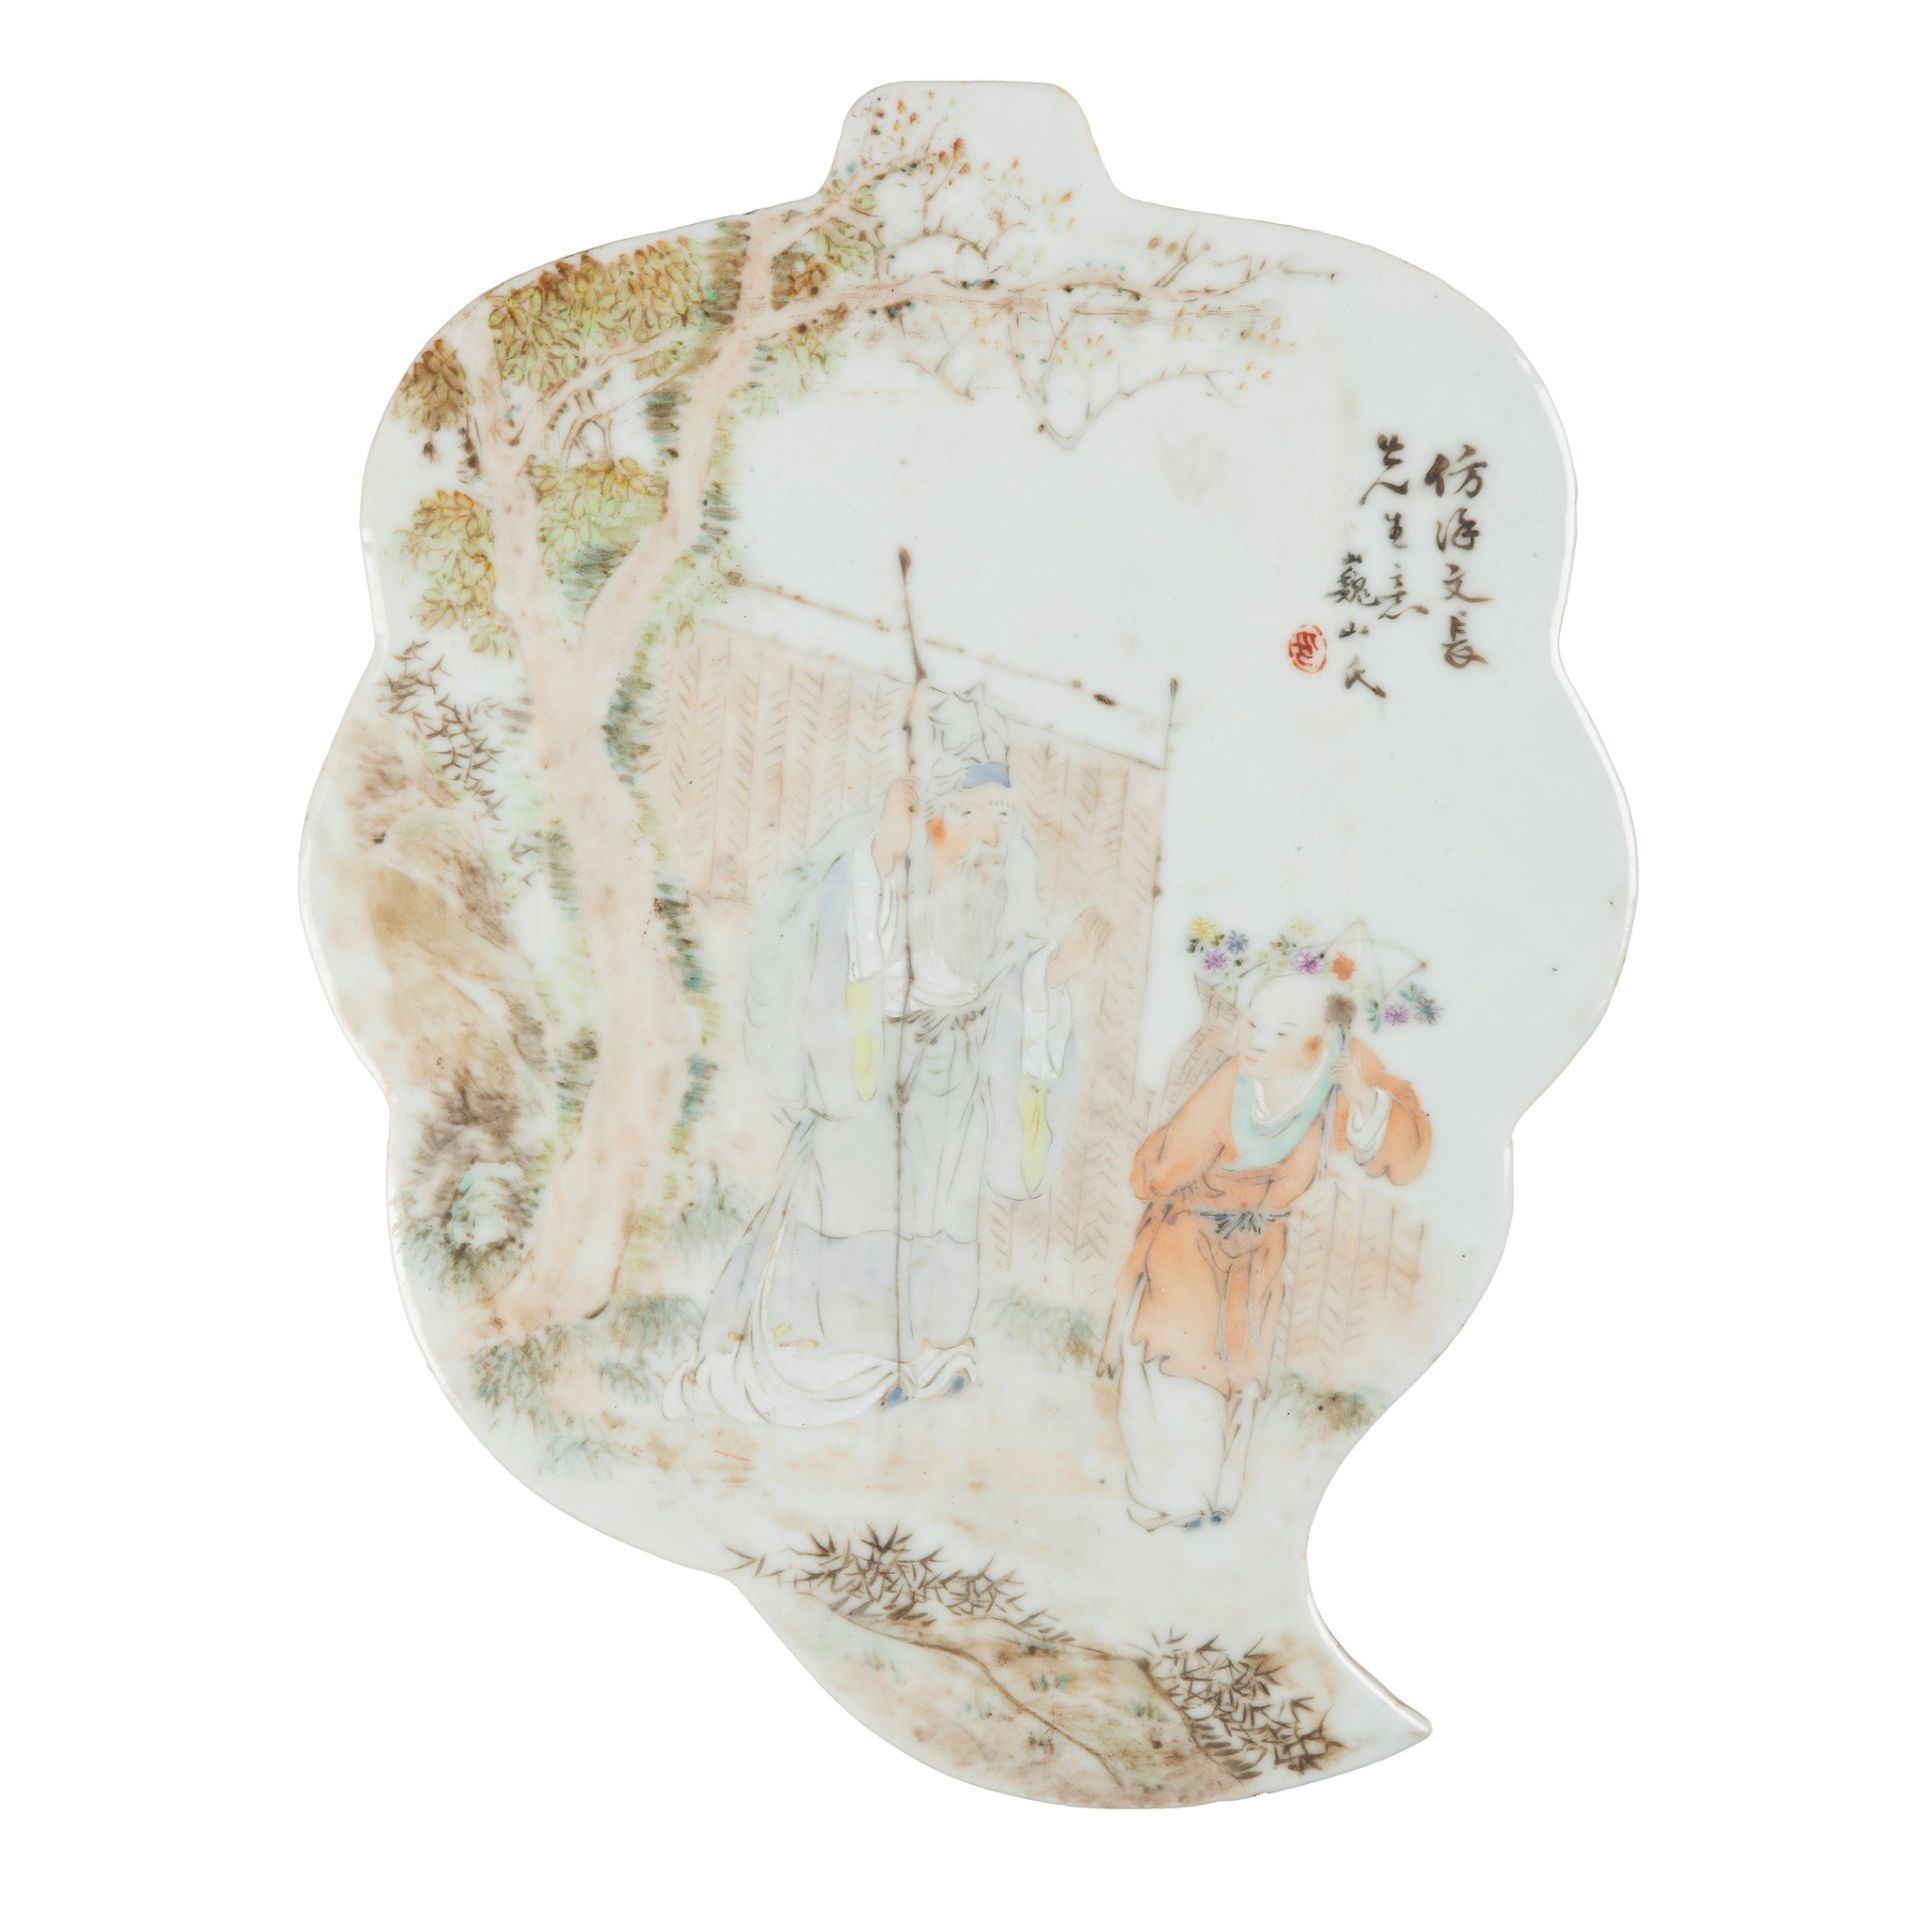 QIANJIANG ENAMELLED LEAF-FORM PORCELAIN PLAQUE 19TH-20TH CENTURY